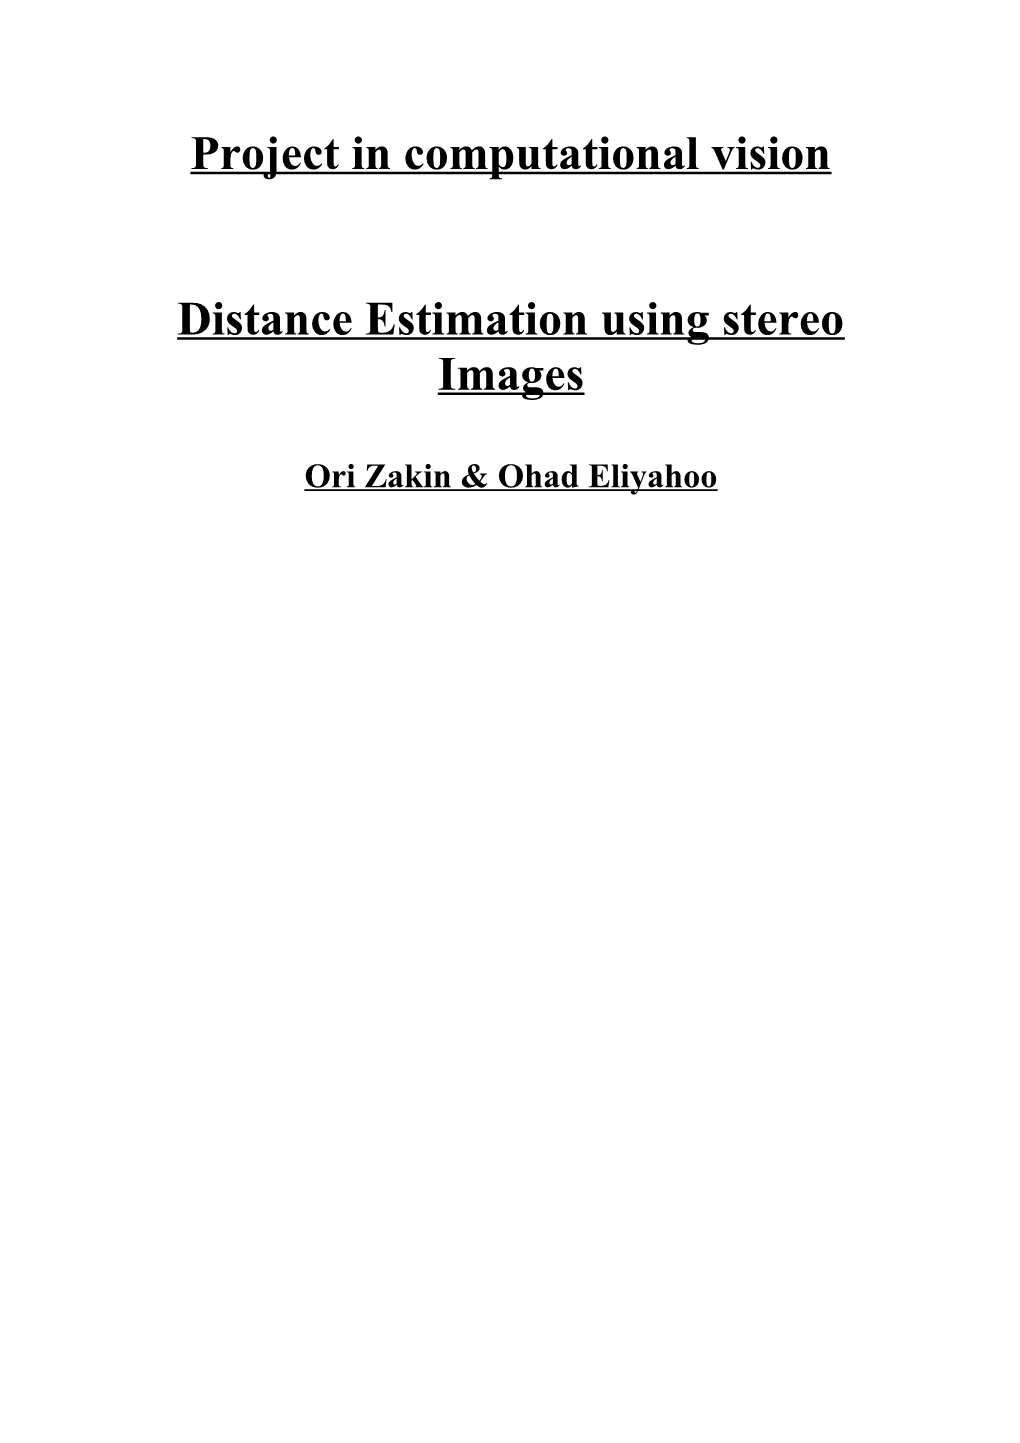 Distance Estimation Using Stereo Images